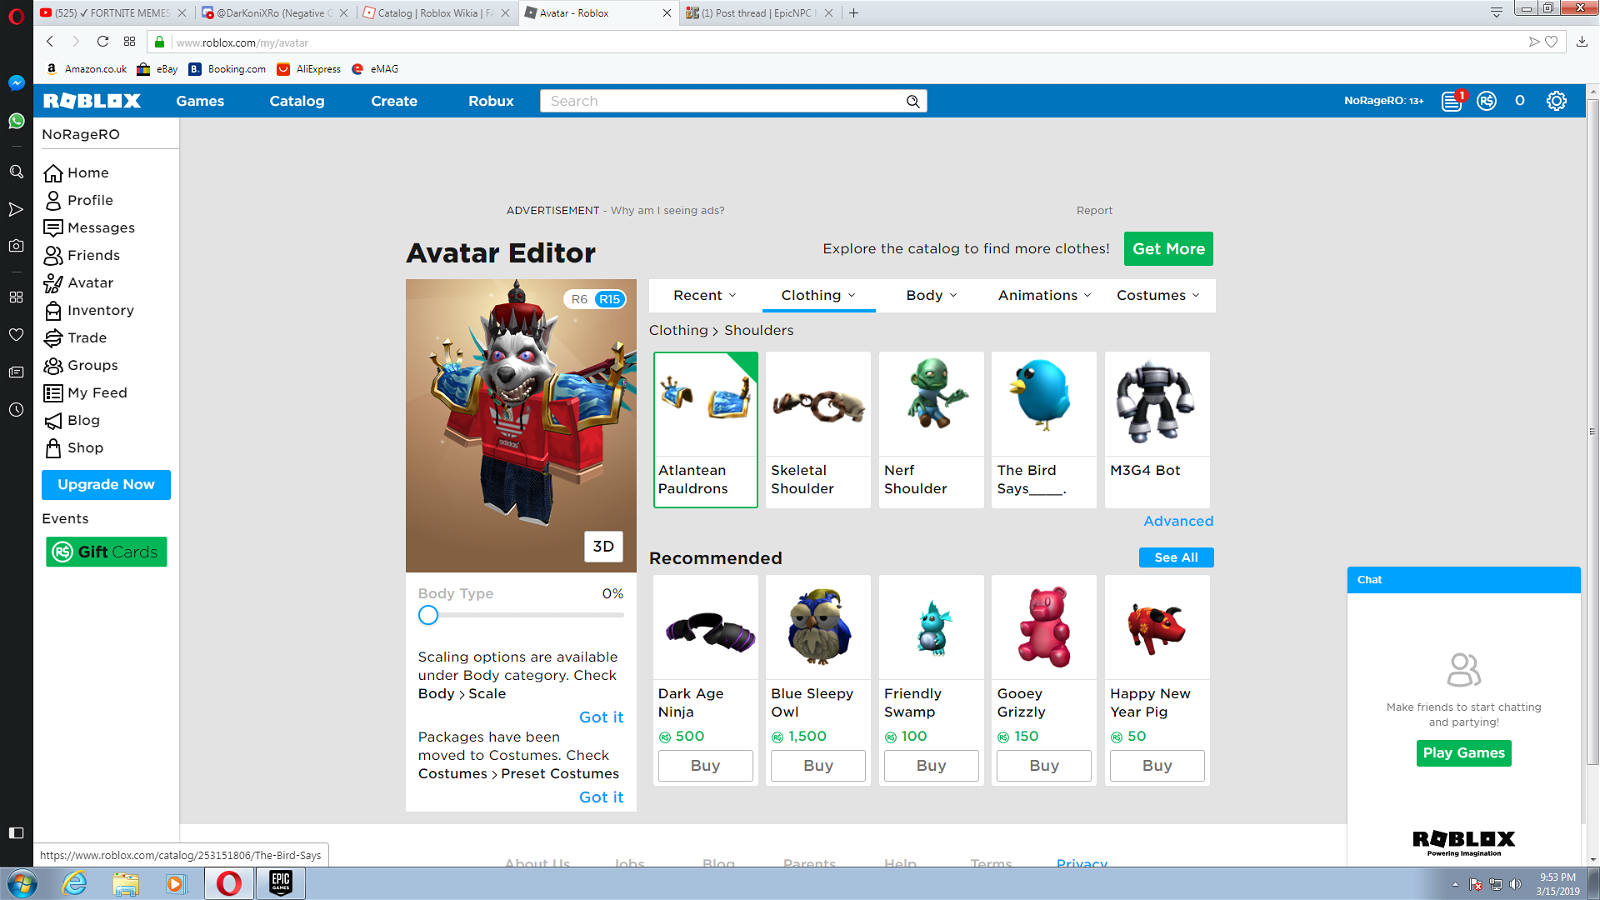 Roblox Trading News on X: There are many offsale items which have